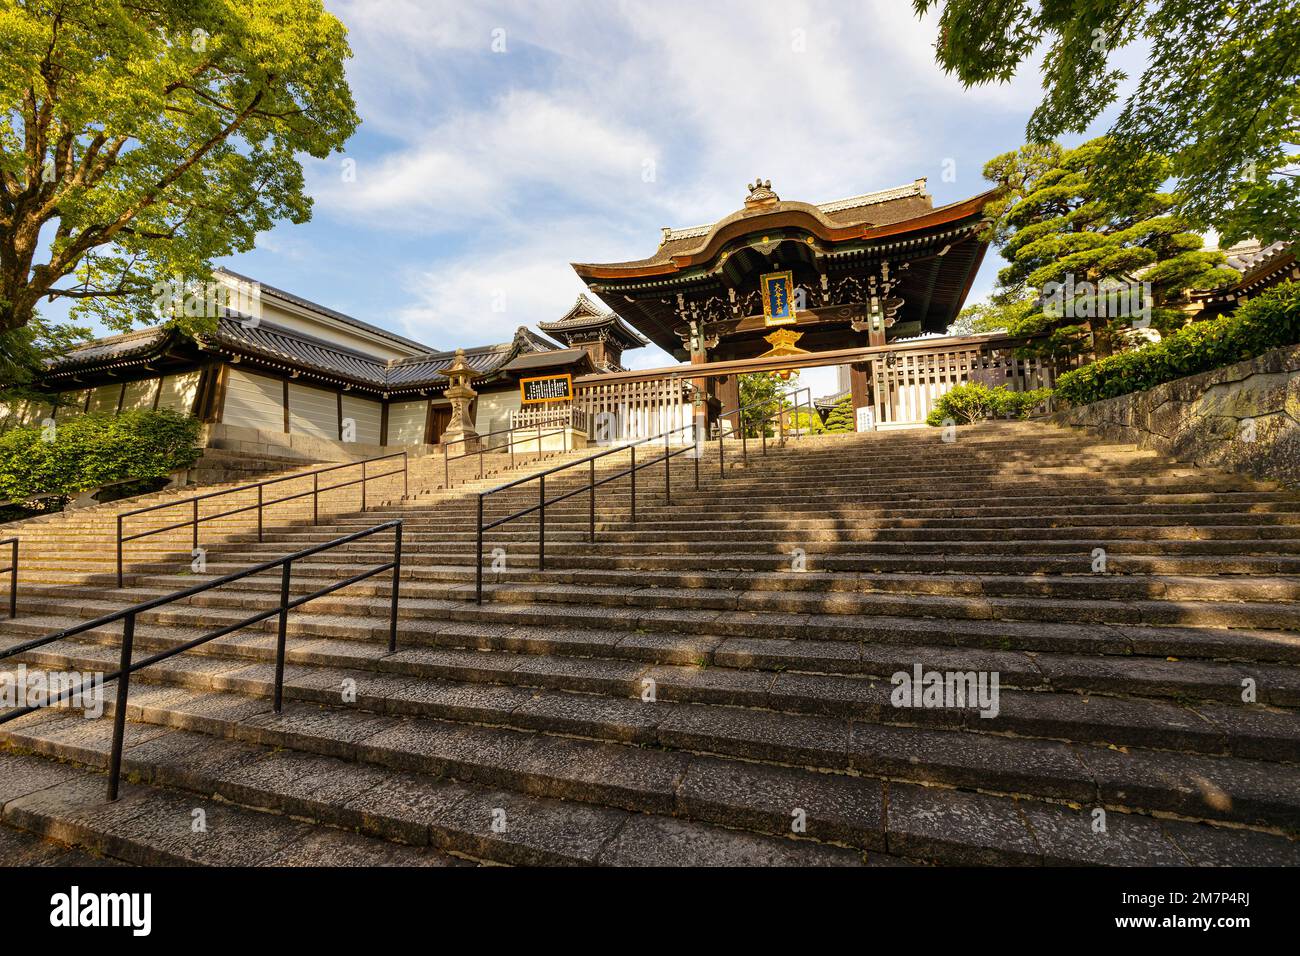 Traditional Buddhist temple in Kyoto city in Japan Stock Photo